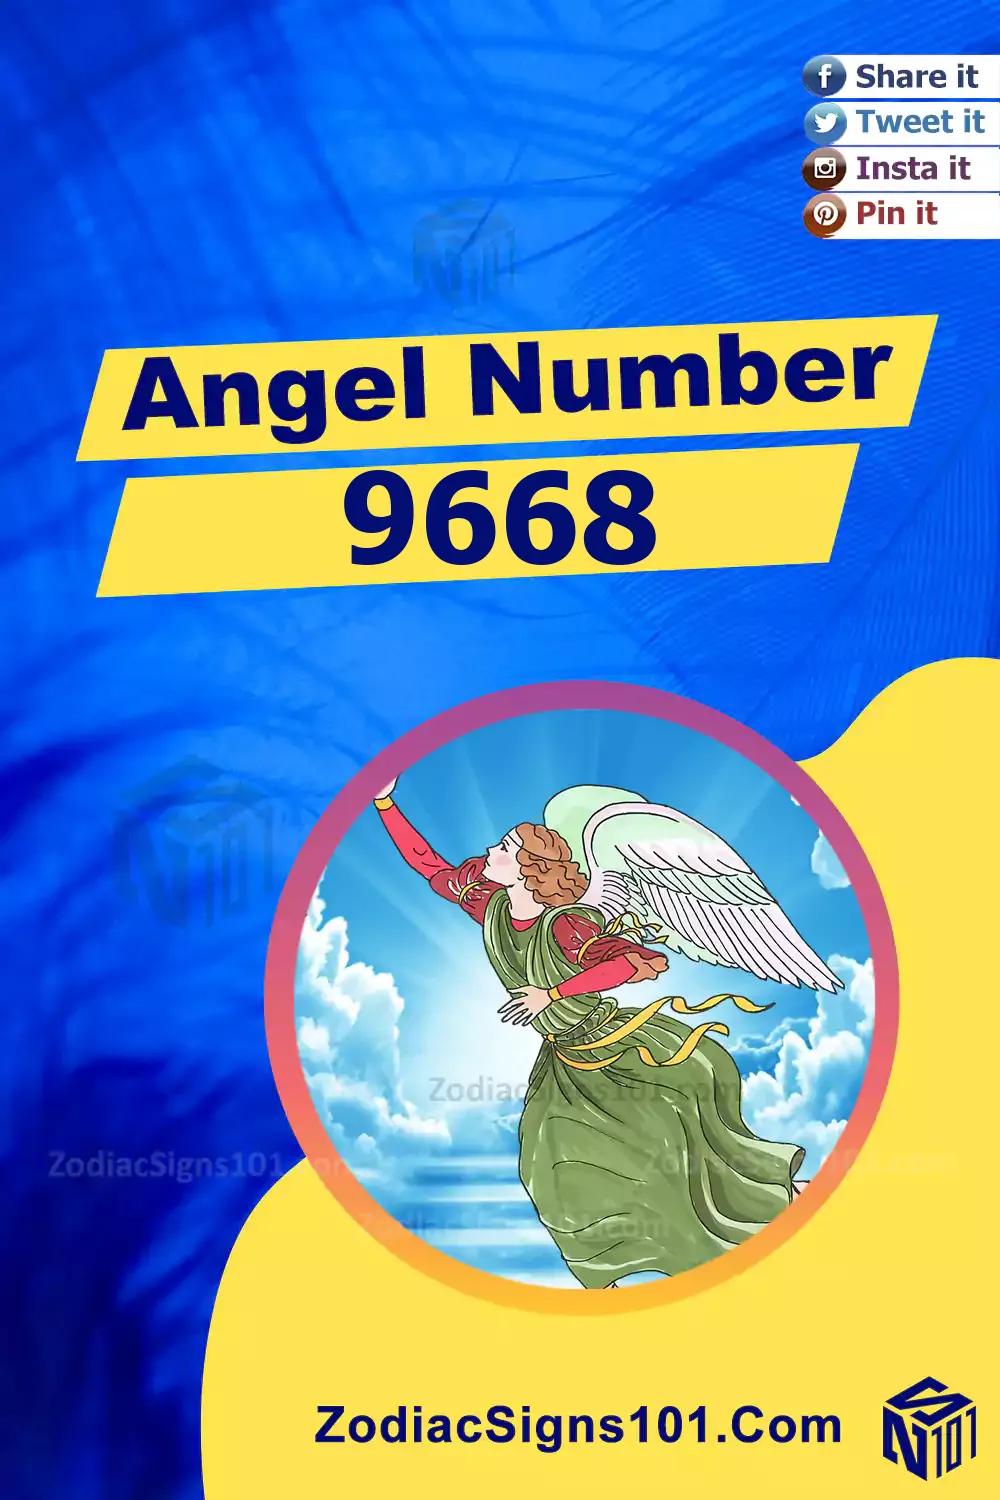 9668 Angel Number Meaning